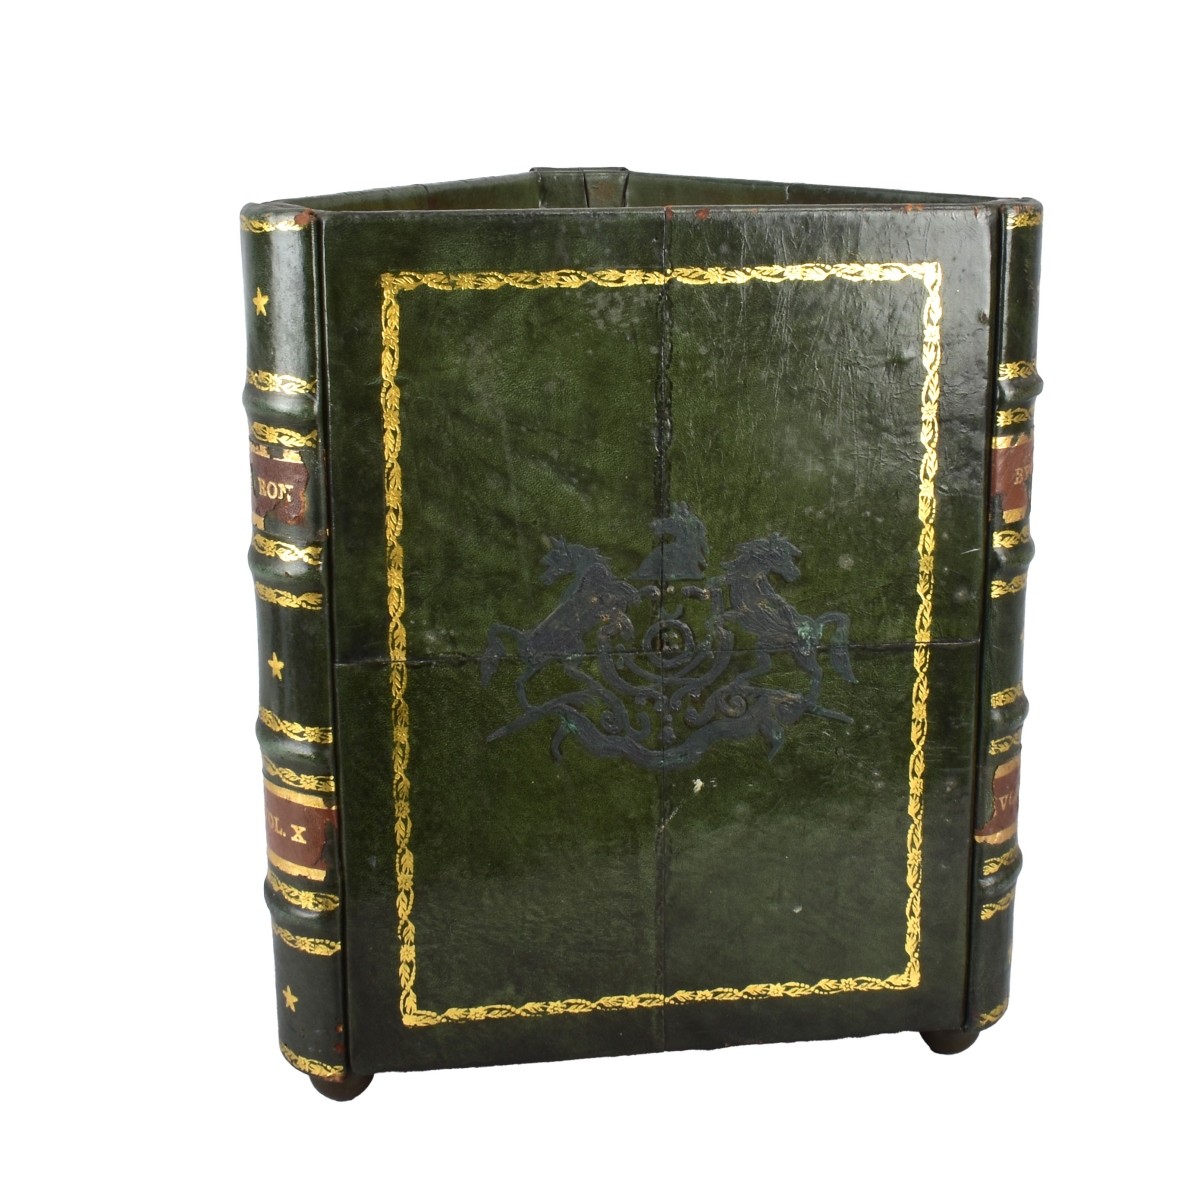 Leather Clad Trash Can Book Motif